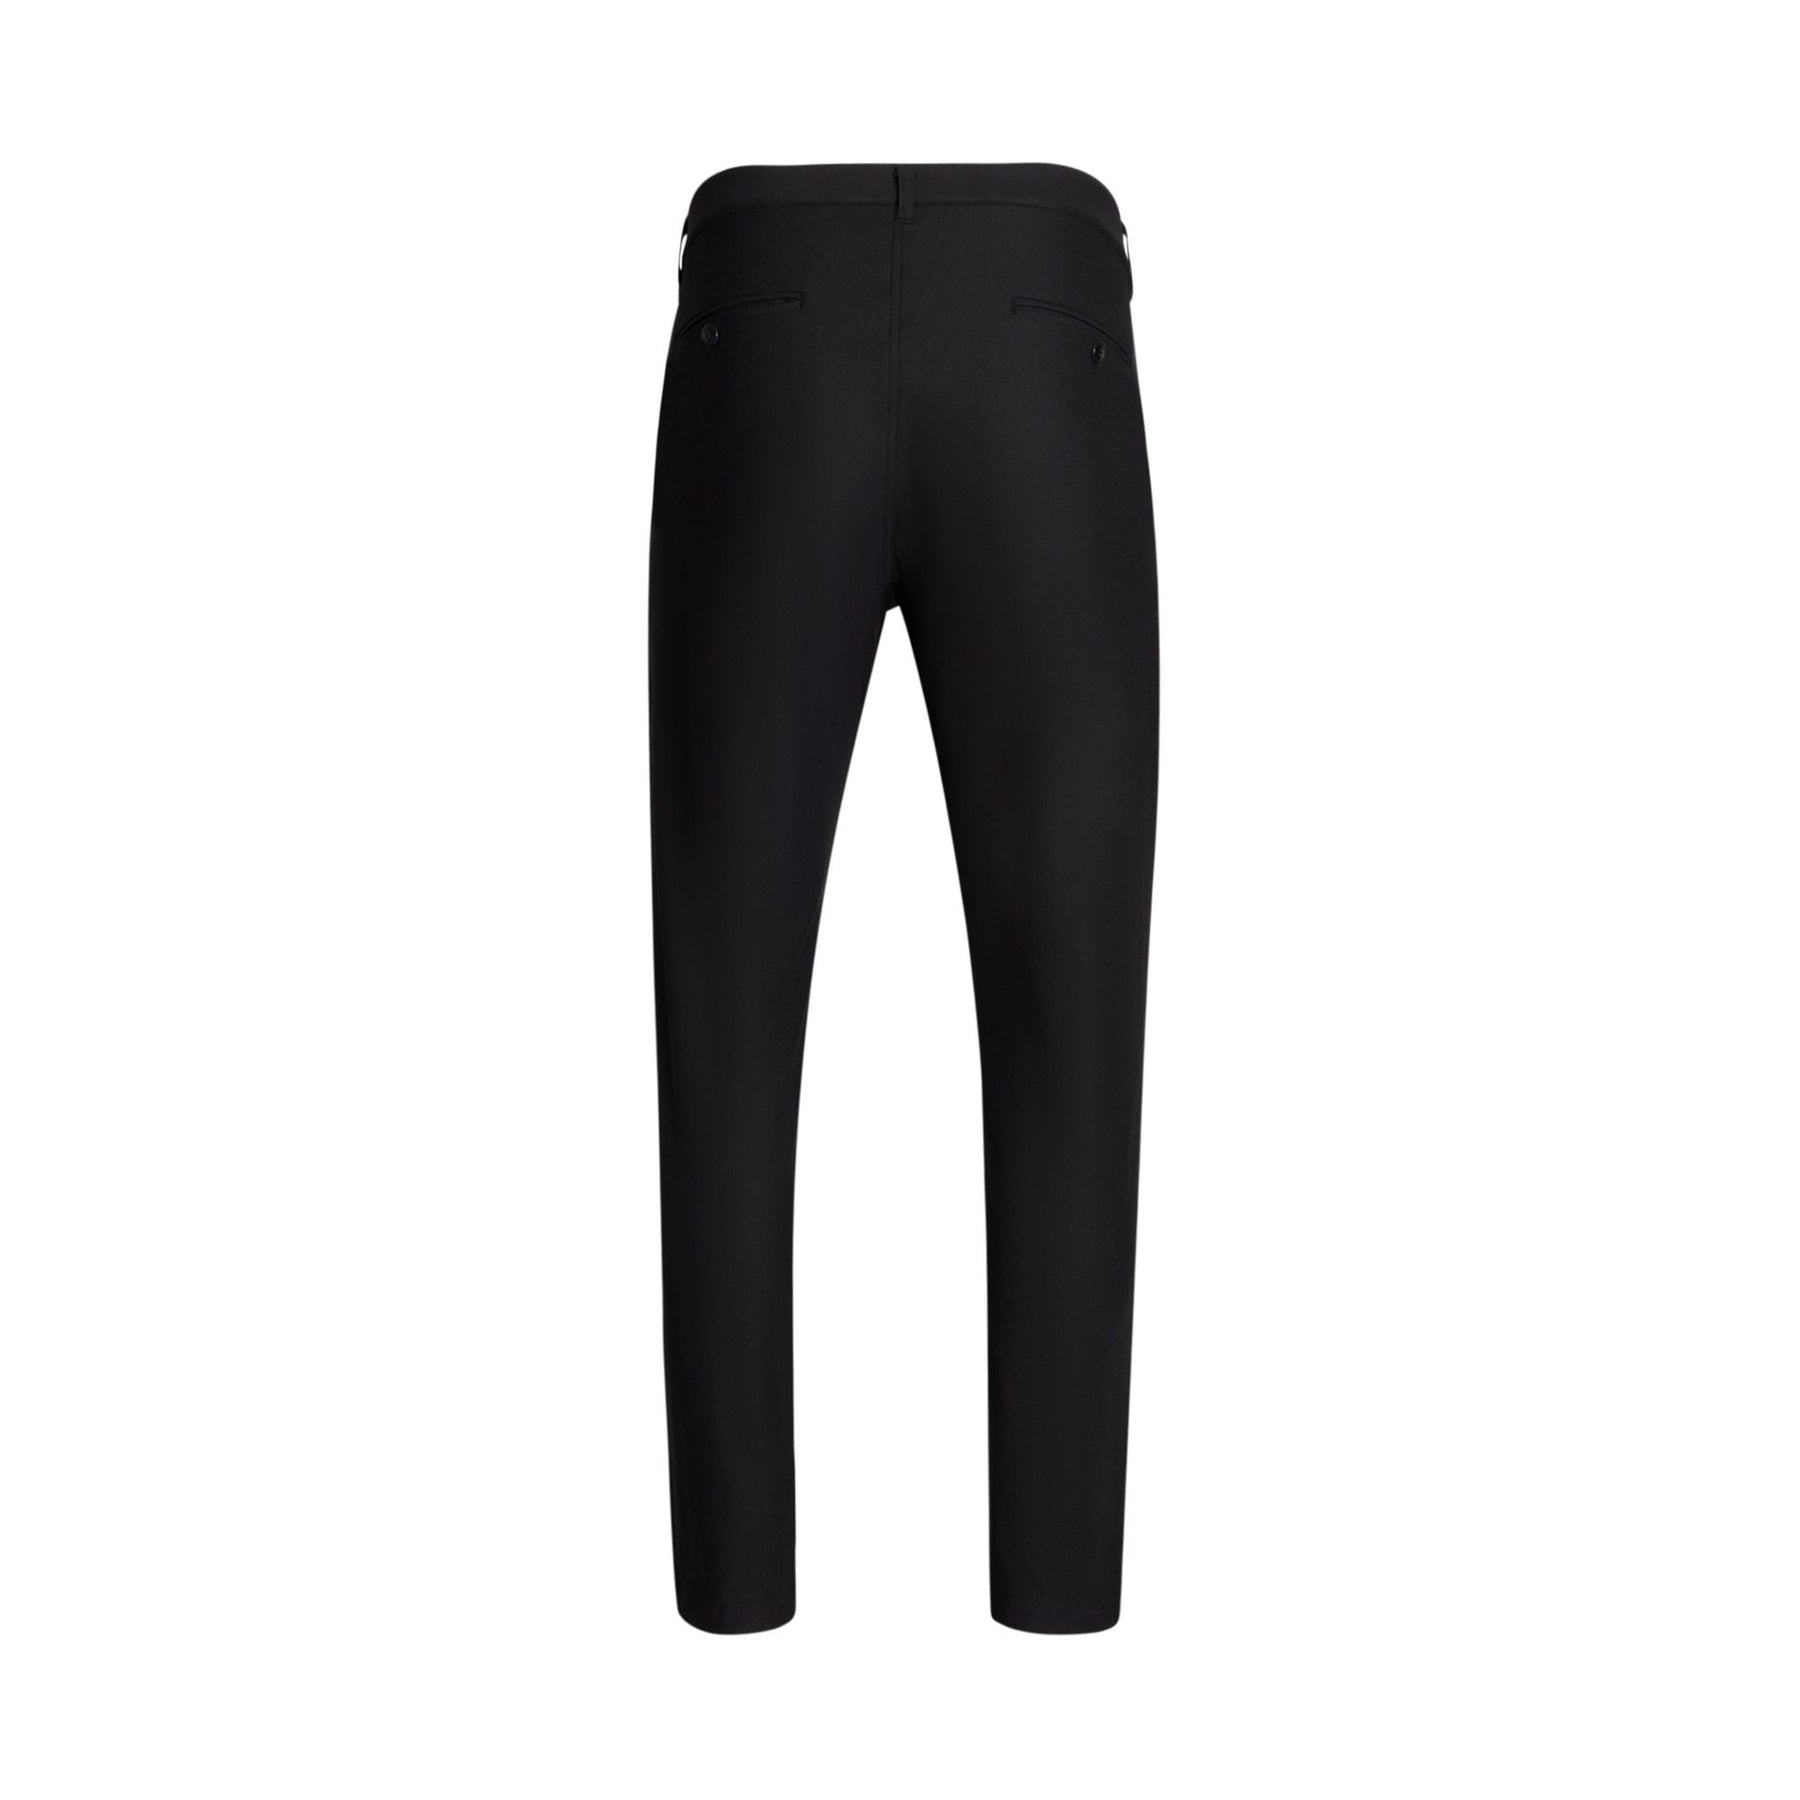 Black Performance Pants – The His Place